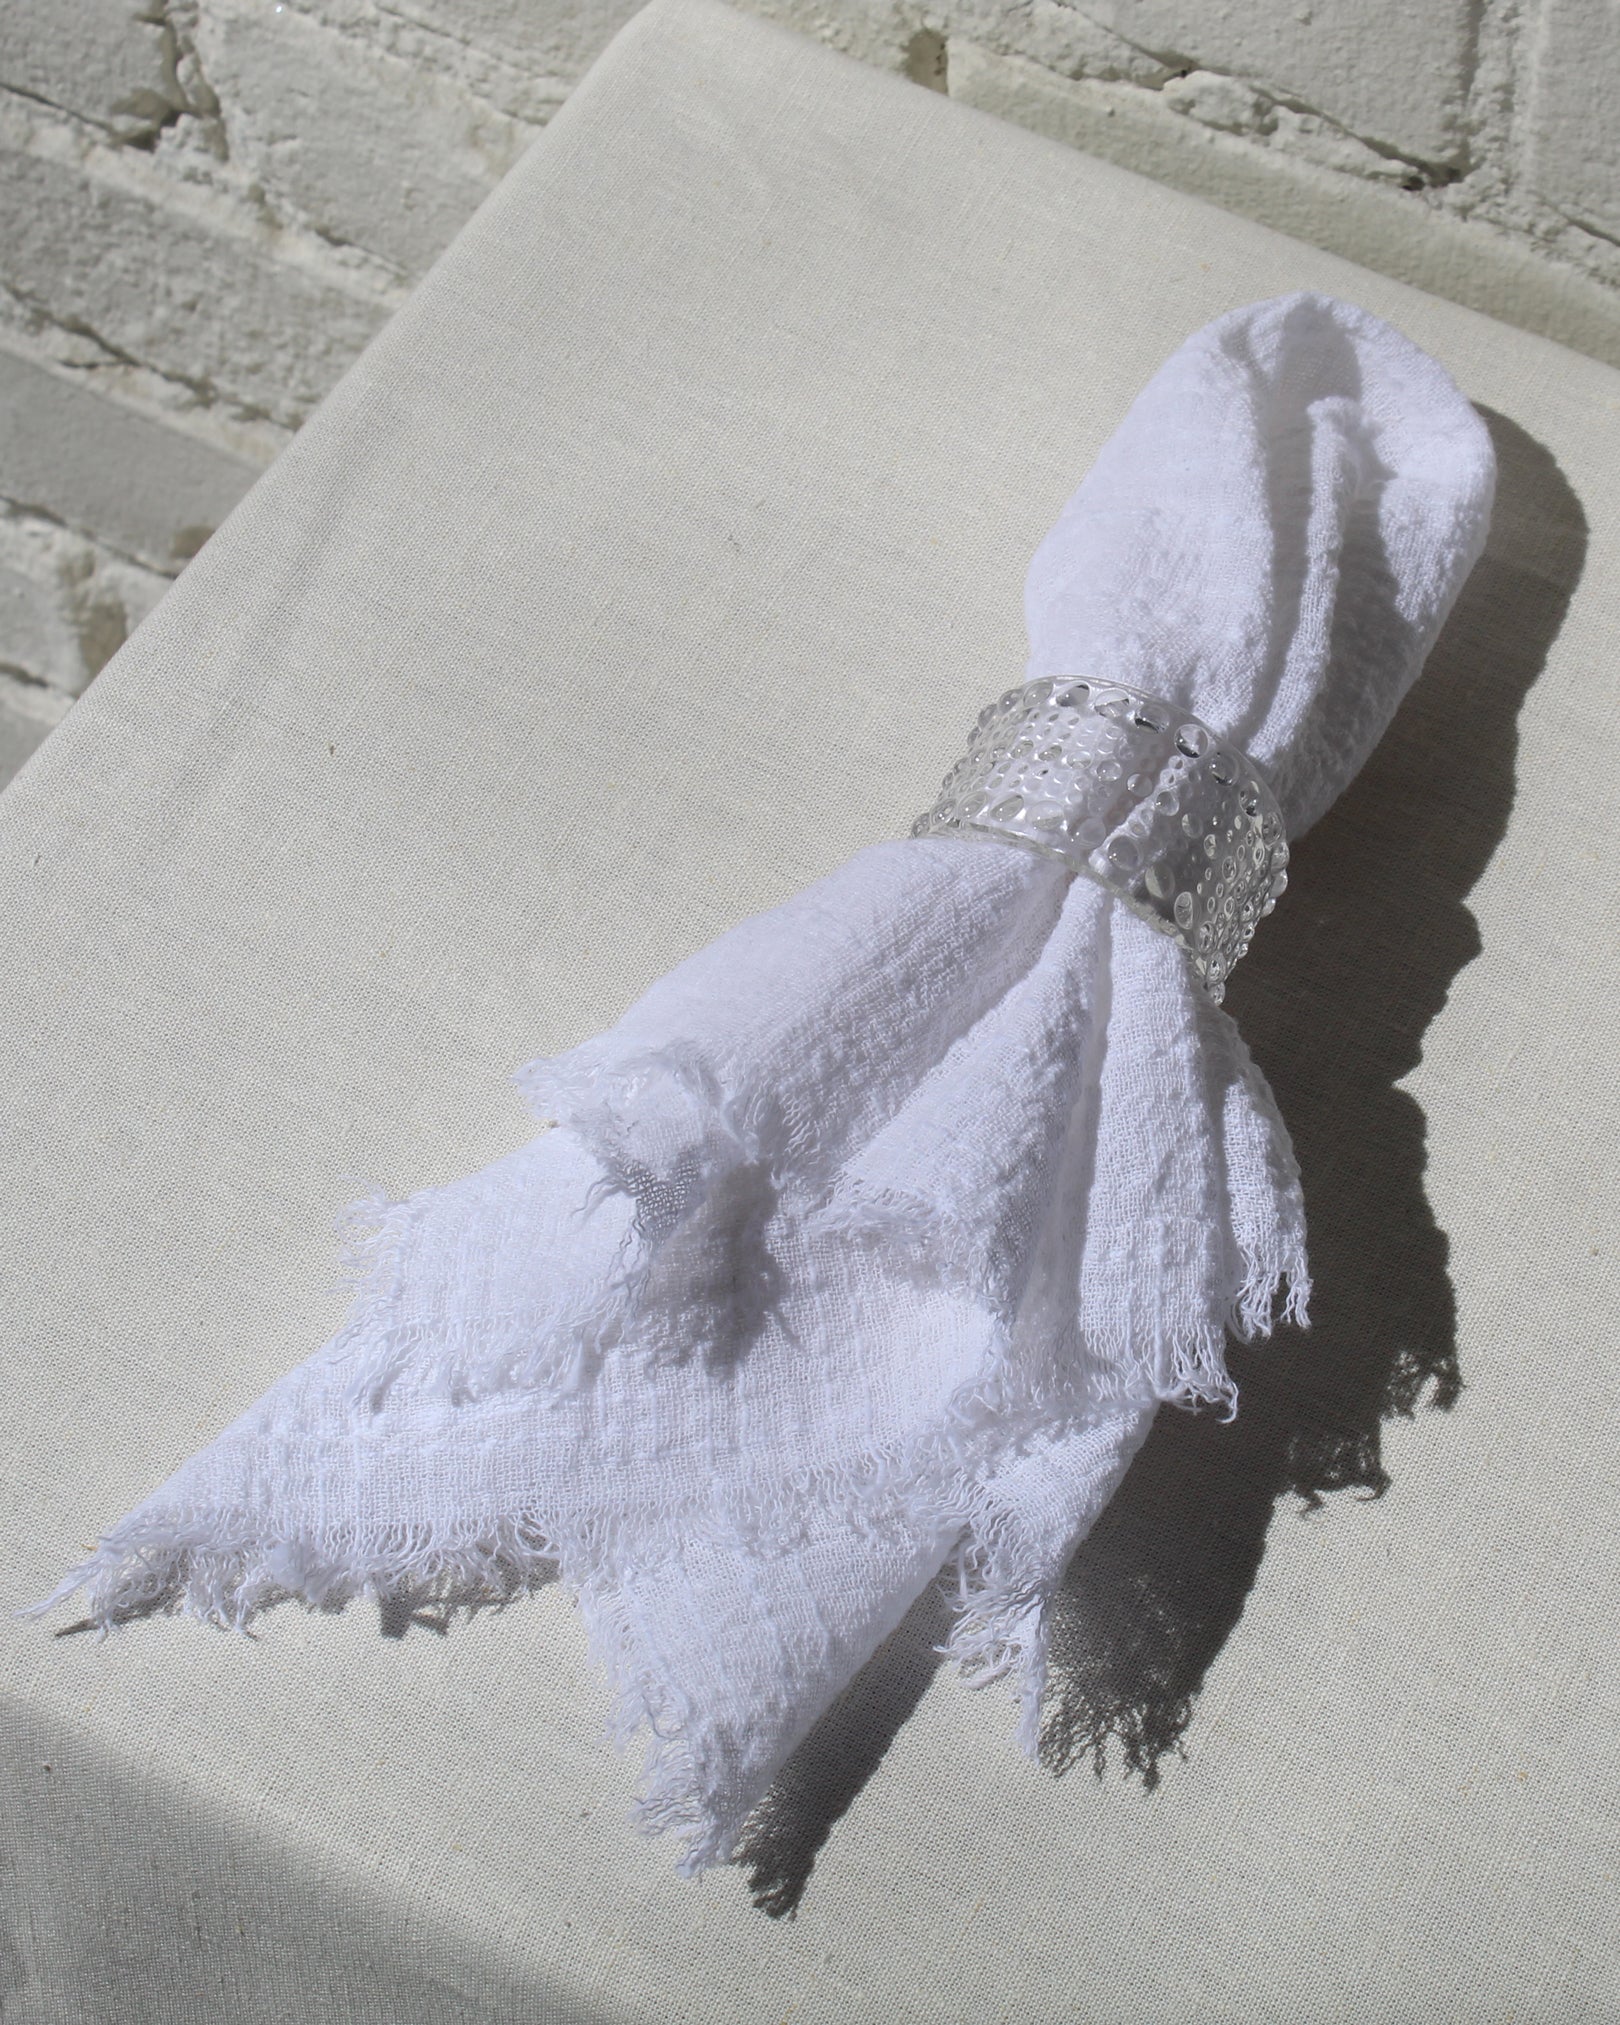 9 CHRISTOPHER Washed Linen Napkin in White available at Lahn.shop